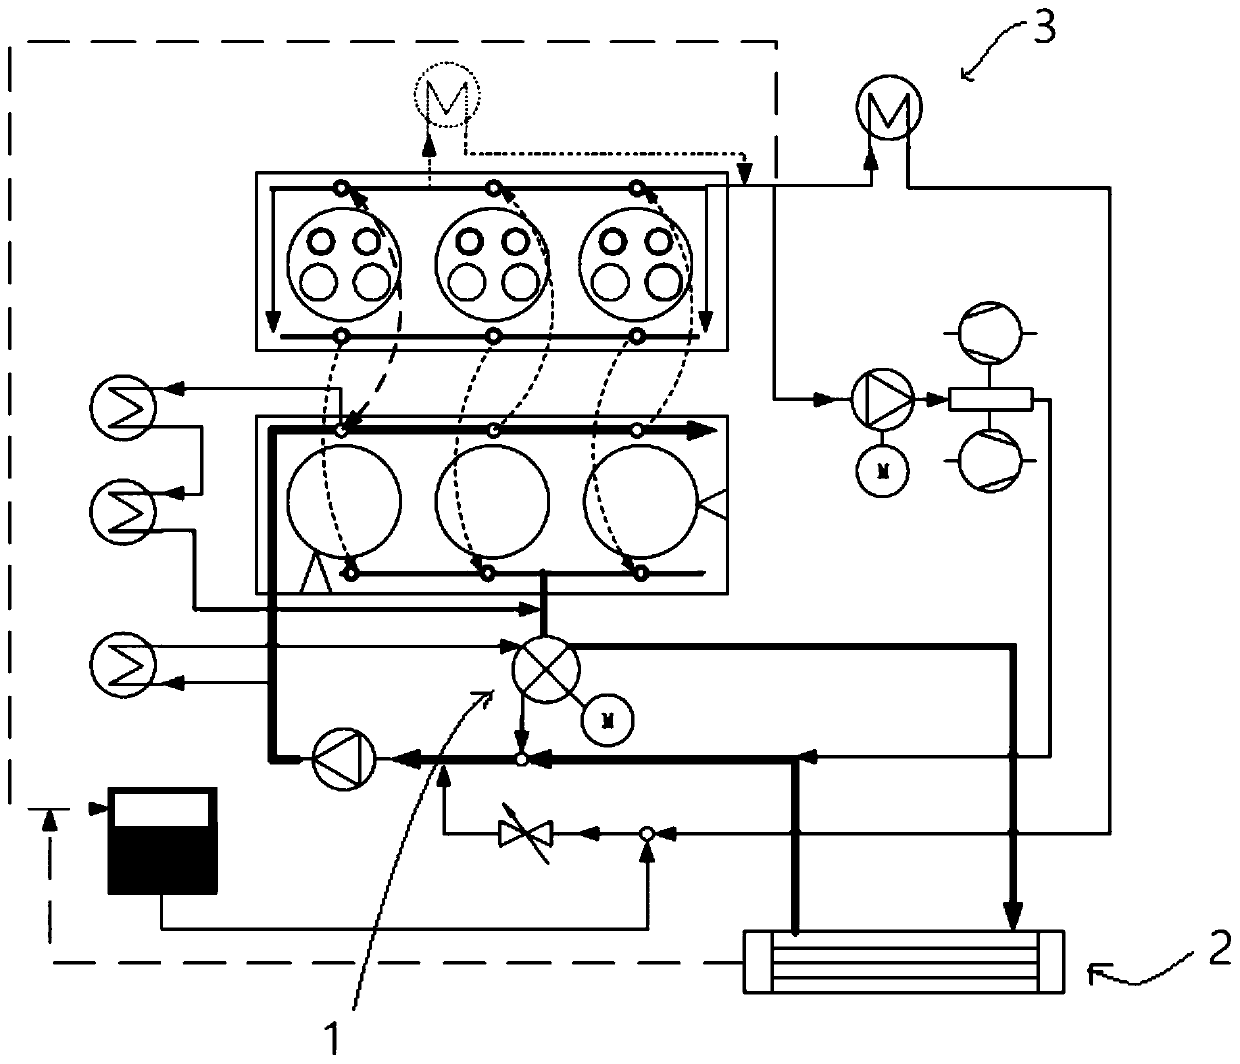 Cooling system diagnosis method based on TMM